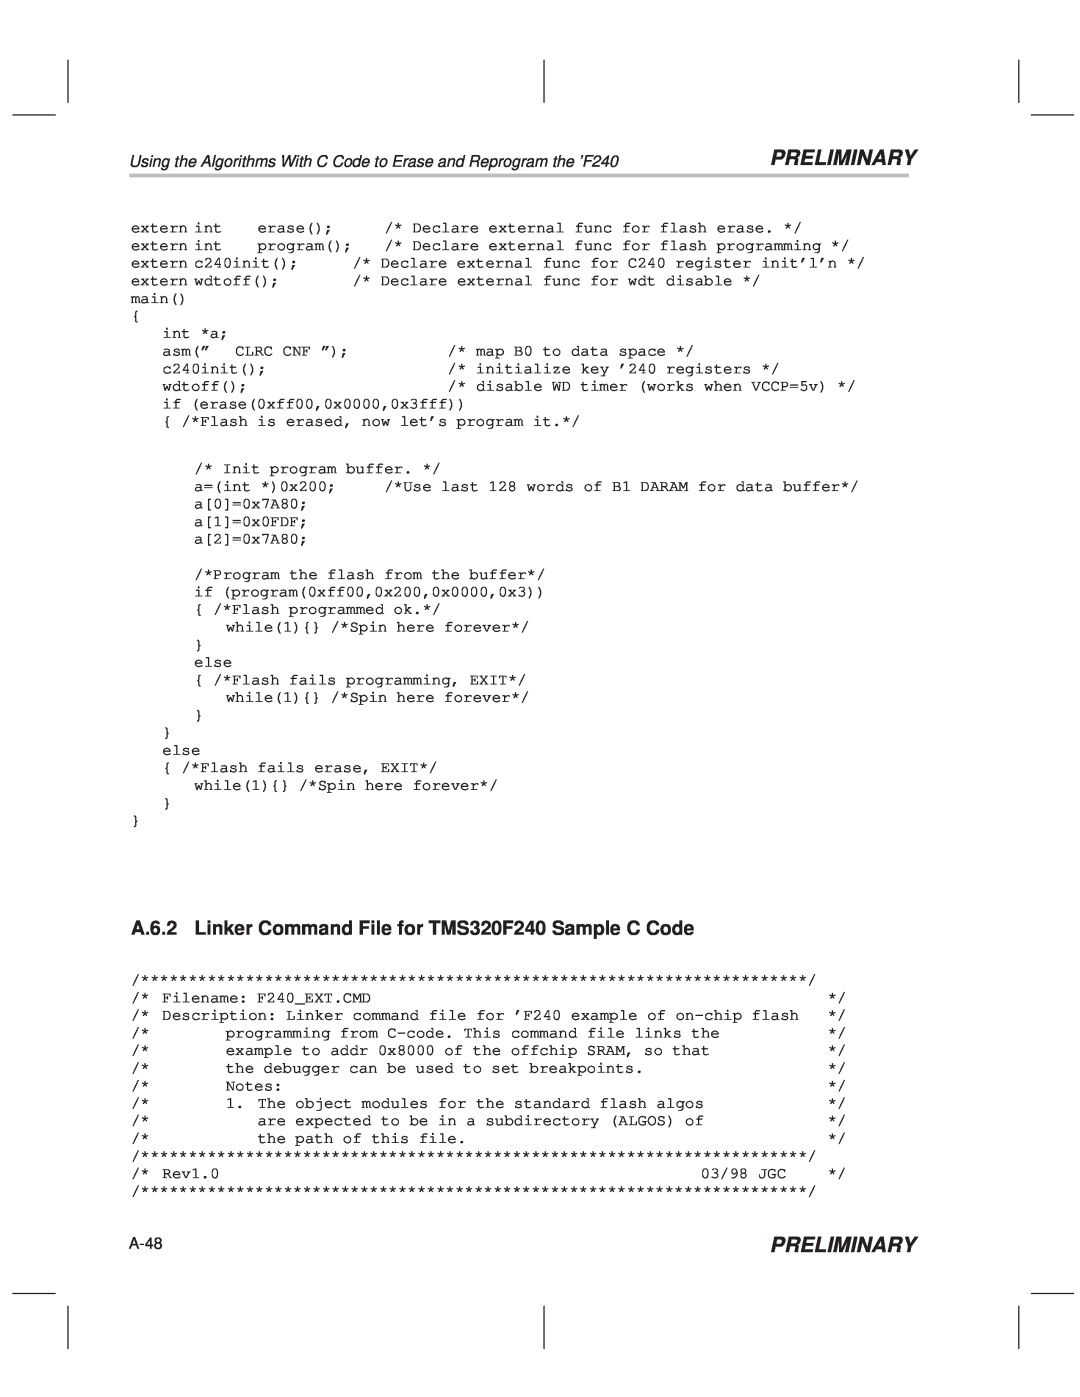 Texas Instruments TMS320F20x/F24x DSP manual A.6.2 Linker Command File for TMS320F240 Sample C Code, Preliminary, A-48 